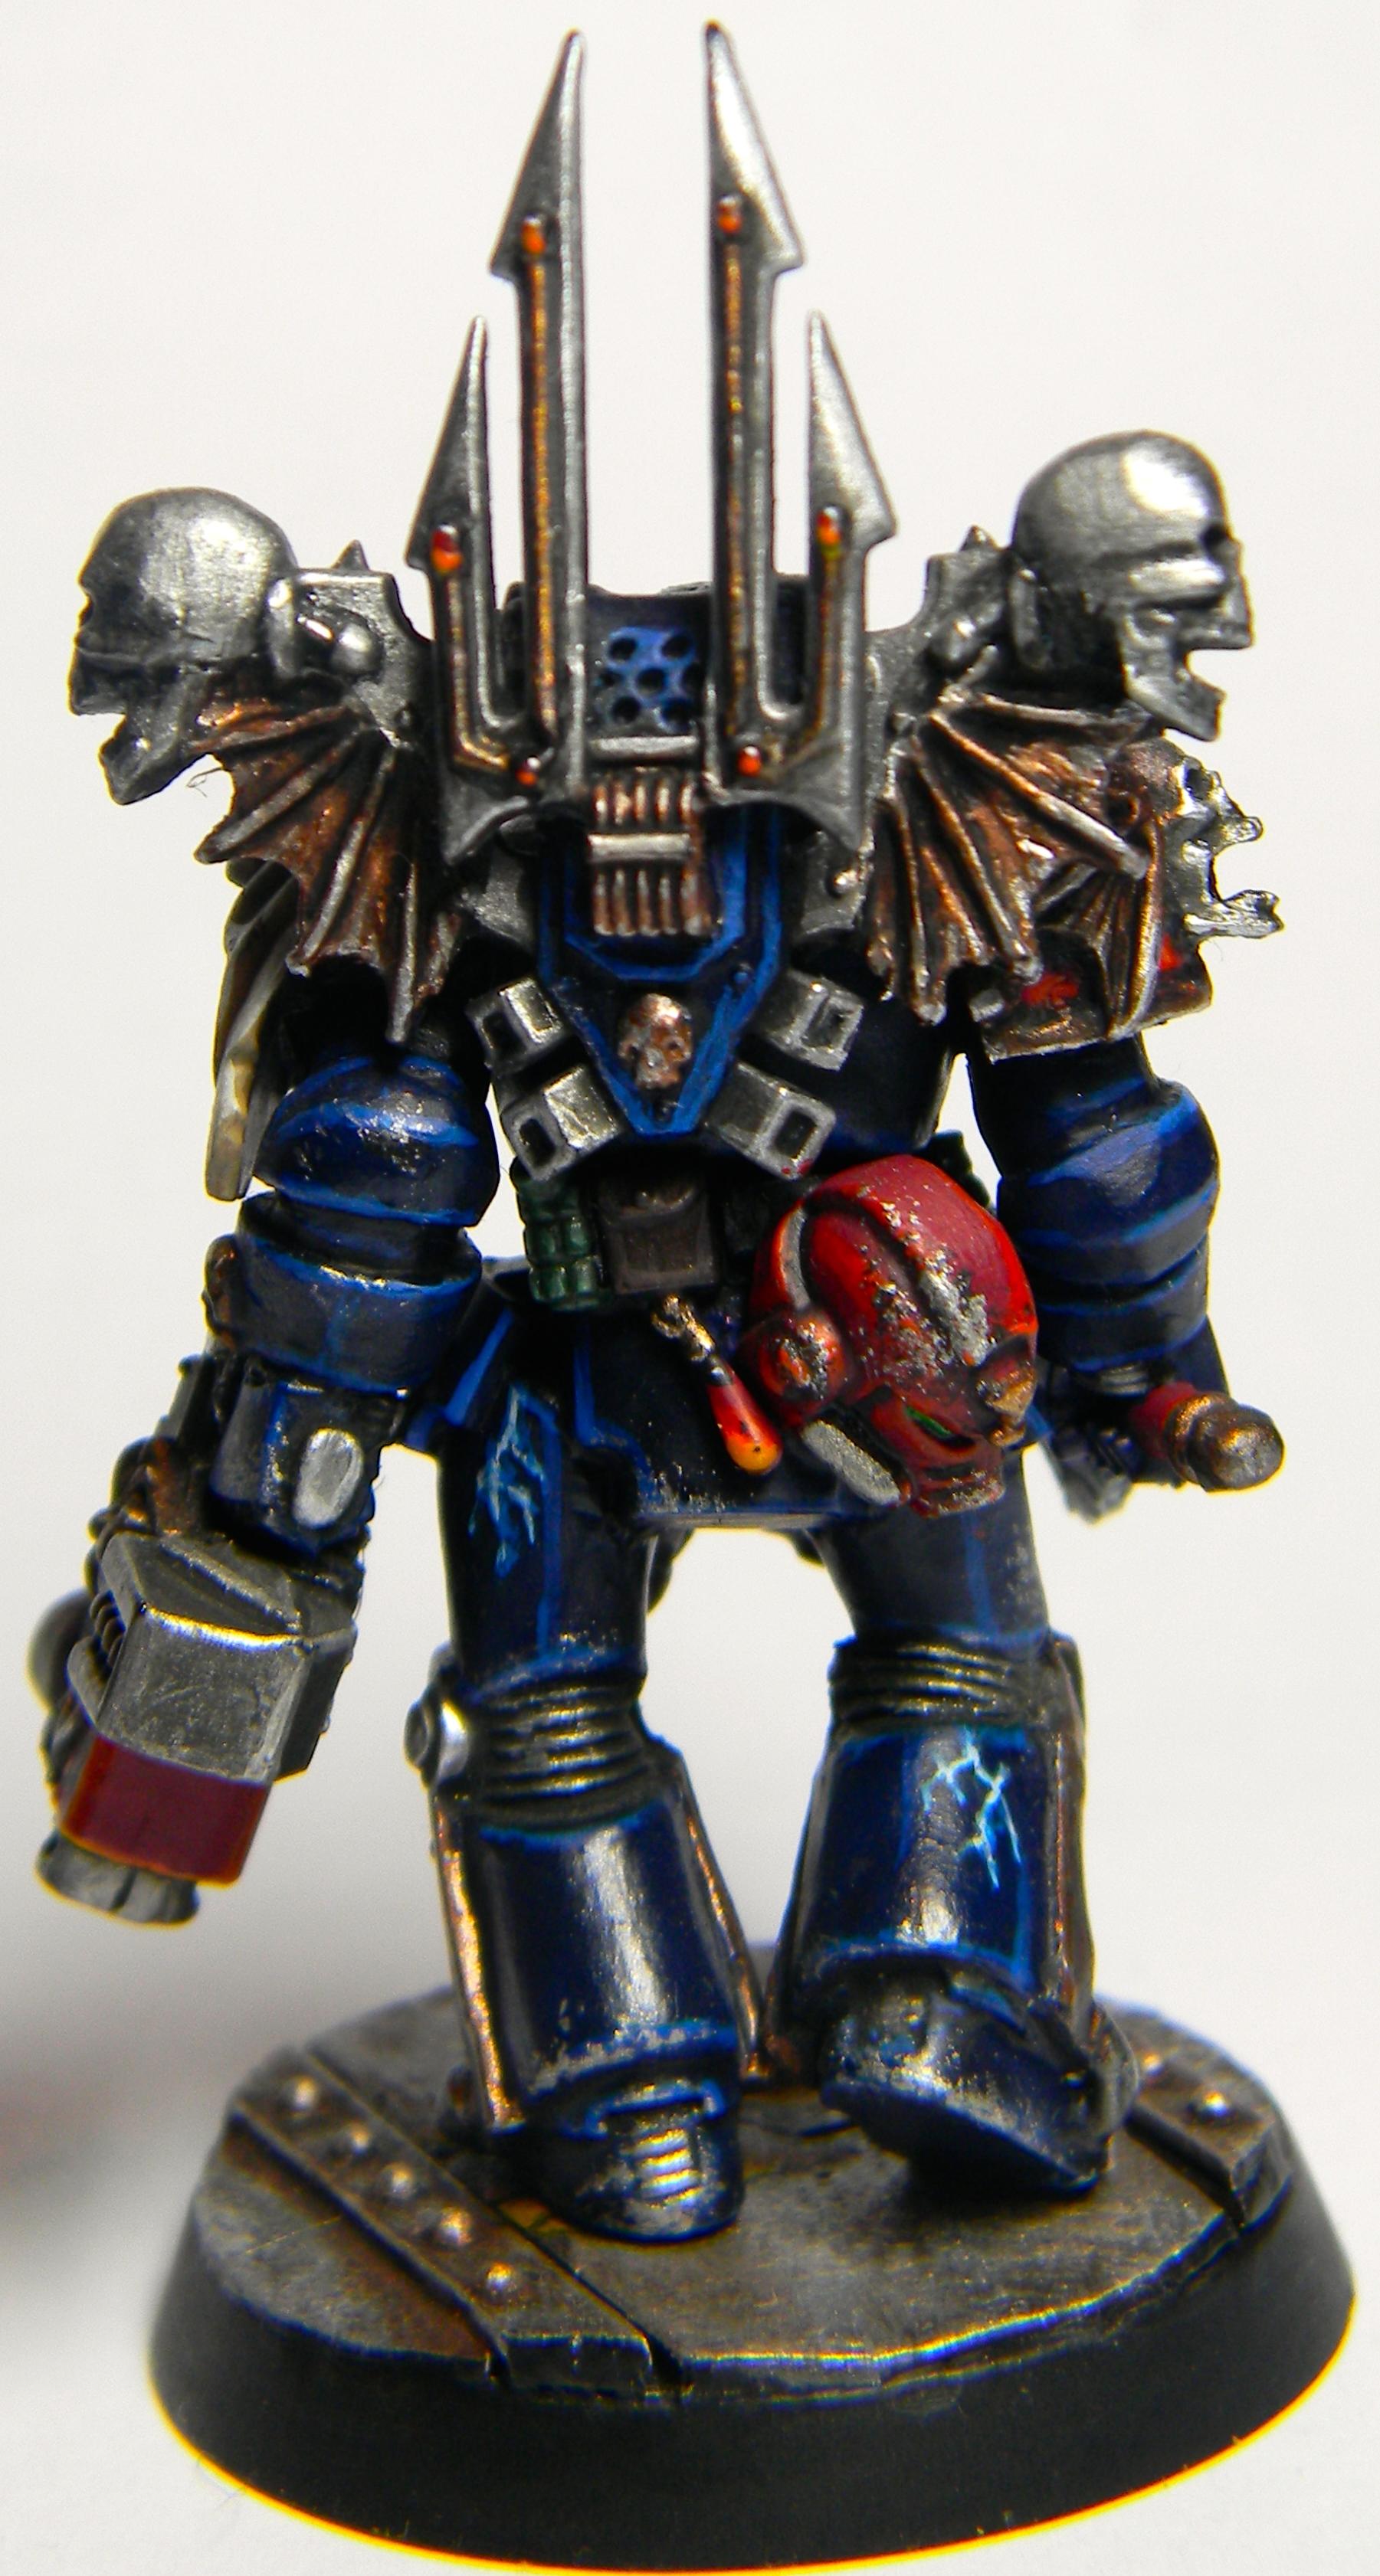 Black Library, Chaos, Conversion, Cyrion, First Claw, Night Lords, Space Marines, Talos, True Scale, Warhammer 40,000